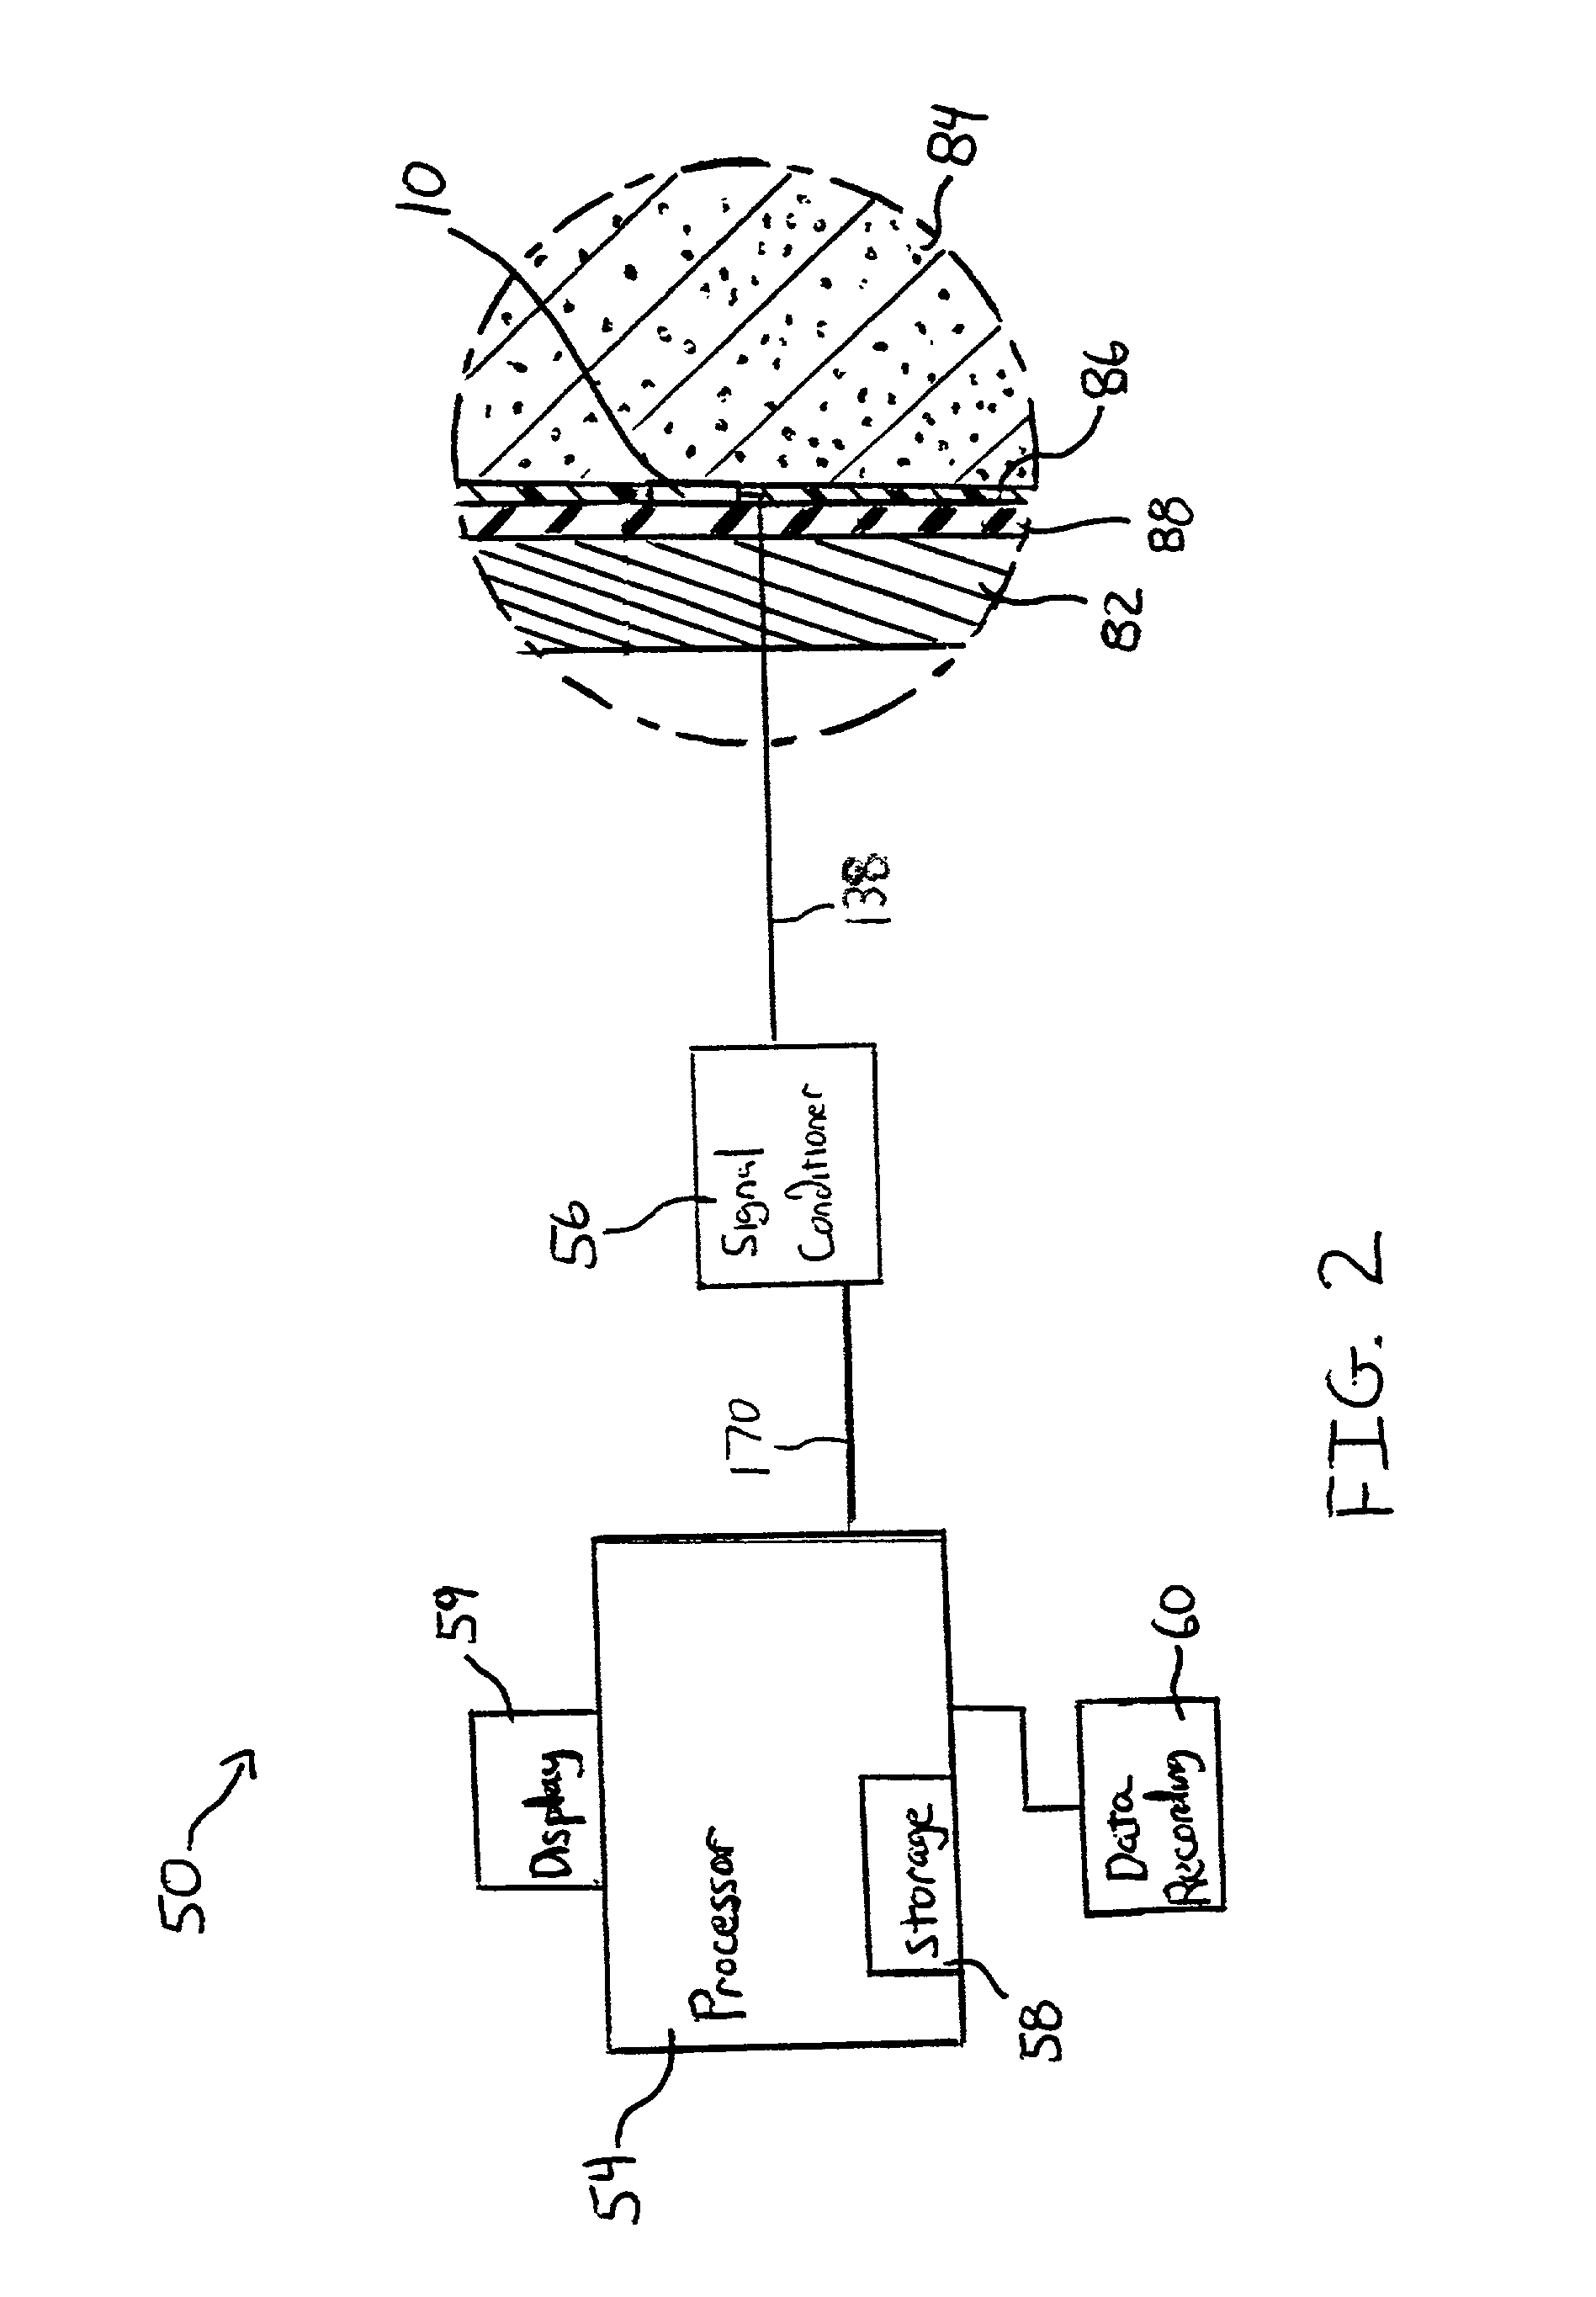 System and method for measuring stress at an interface